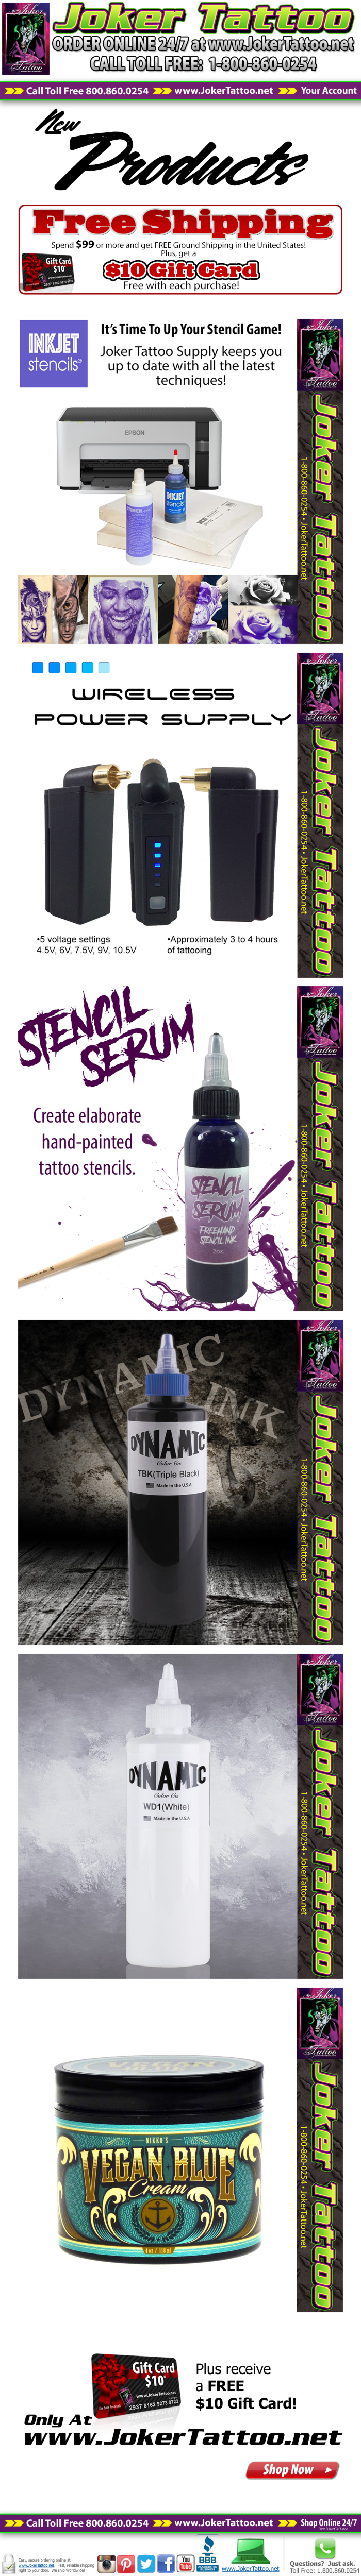 New Products at Joker Tattoo Supply! Plus, receive free ground shipping in the lower 48 US States and a FREE $10 Gift Card with your order!